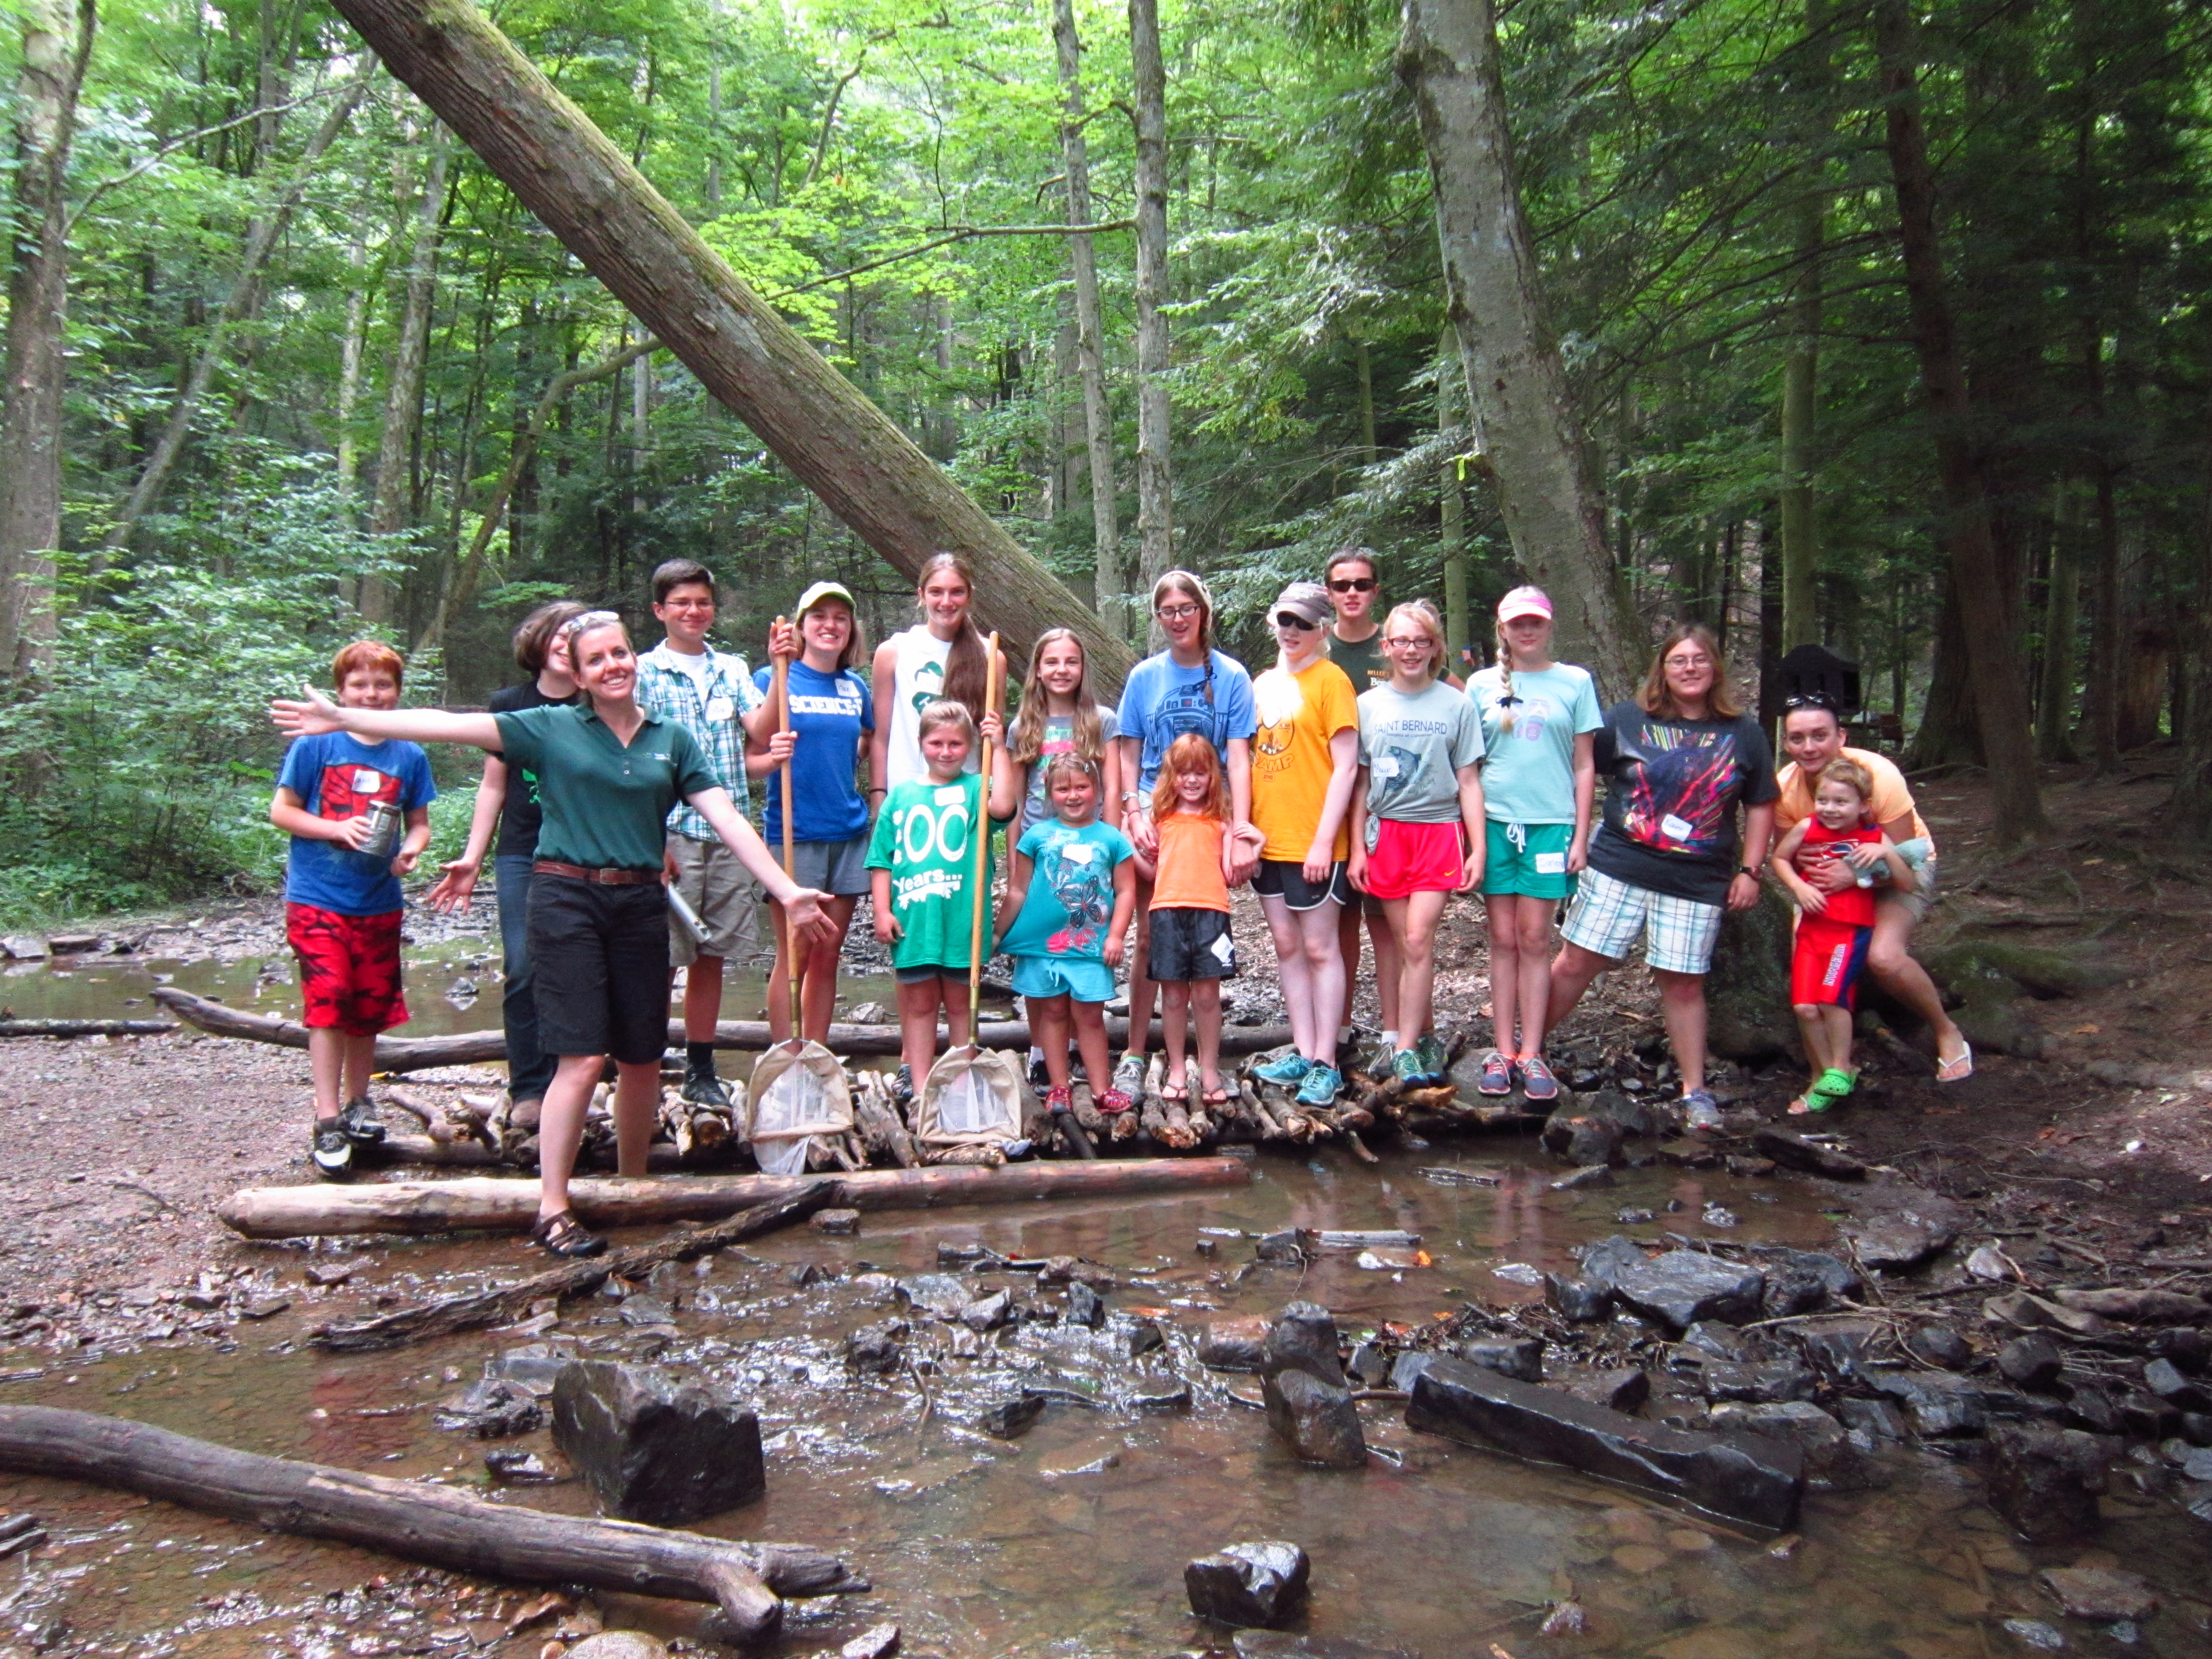 Group shot of kids in a stream